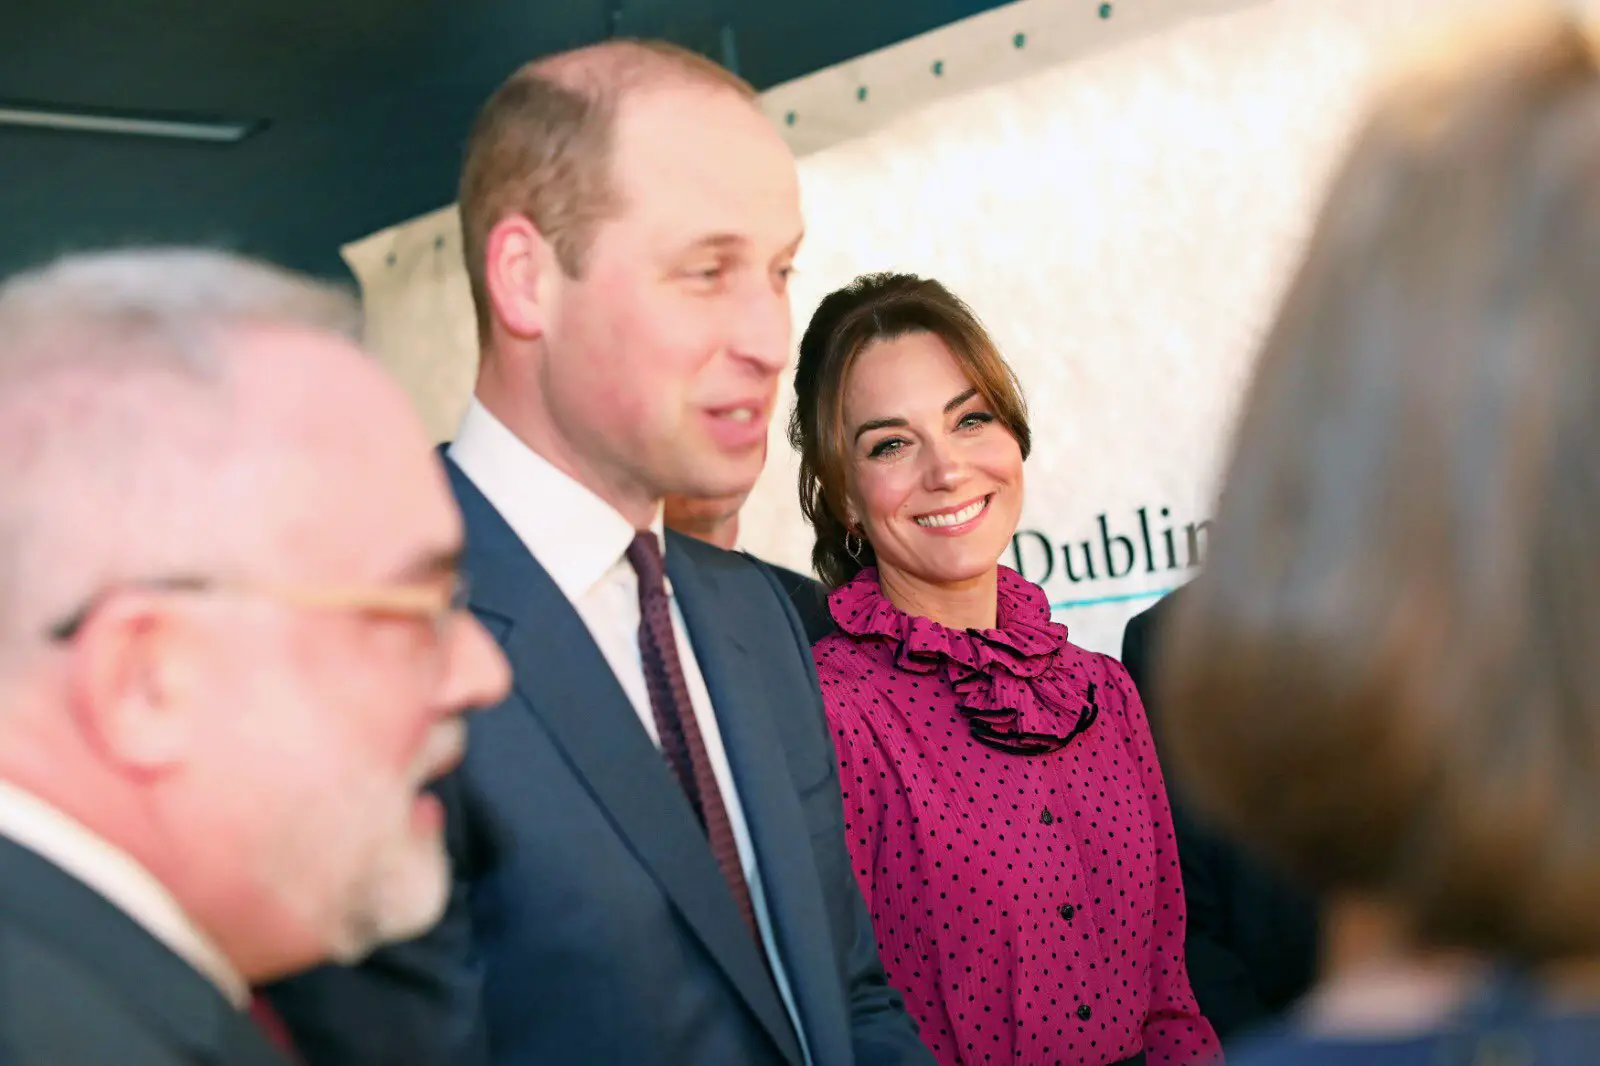 Prince William addressed the gathering and his speech touched on many critical issues faced by both countries.